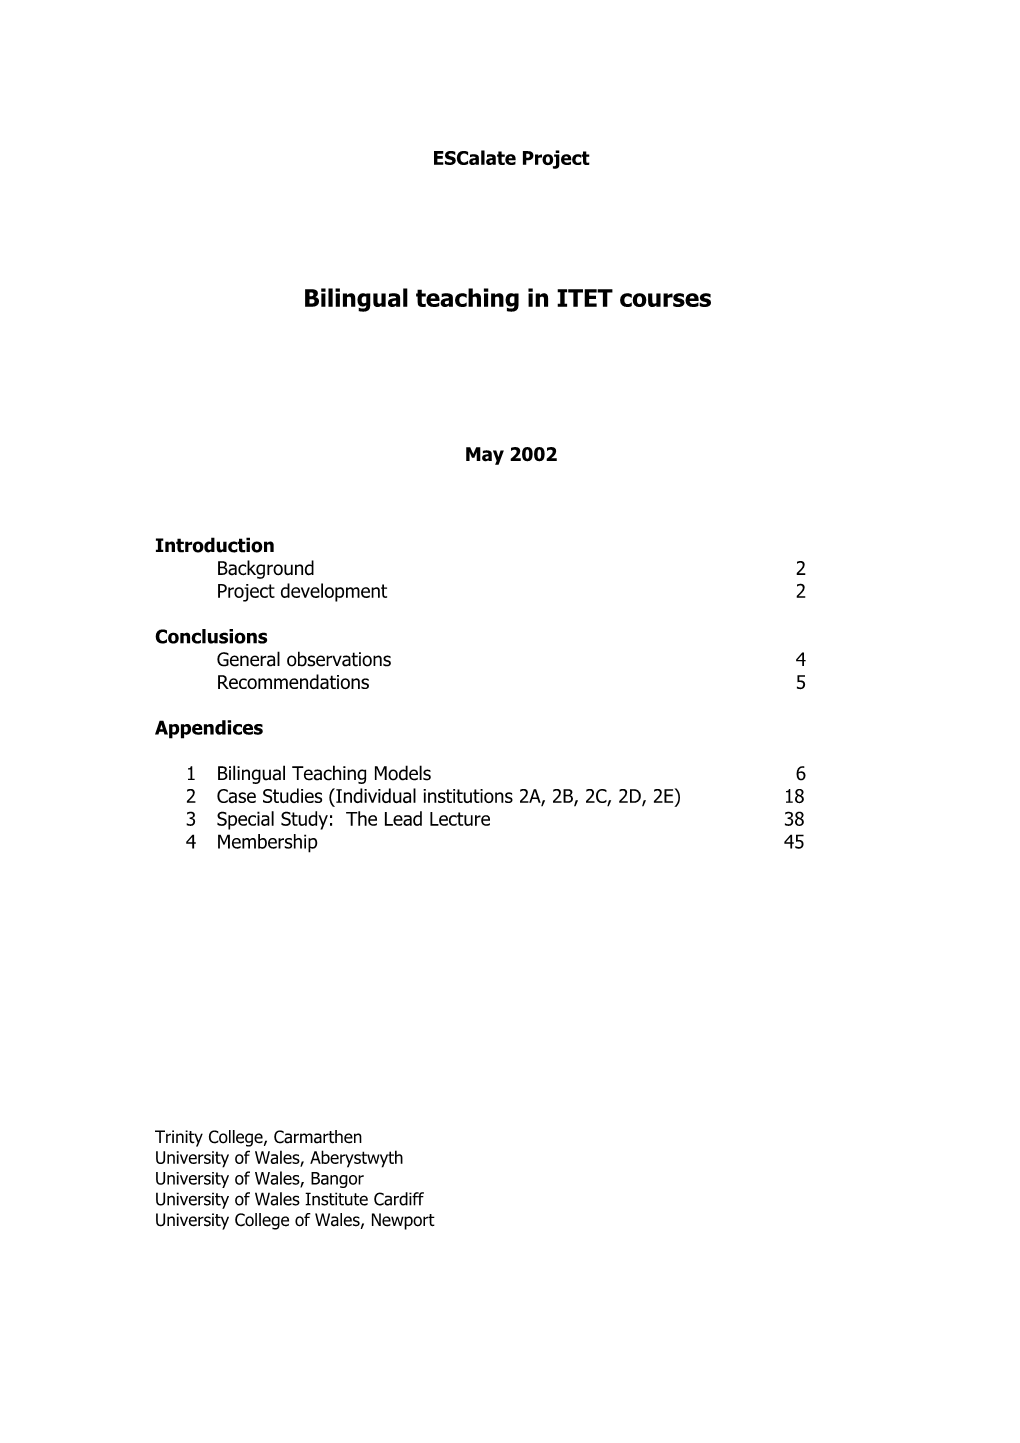 Bilingual Teaching in ITET Courses